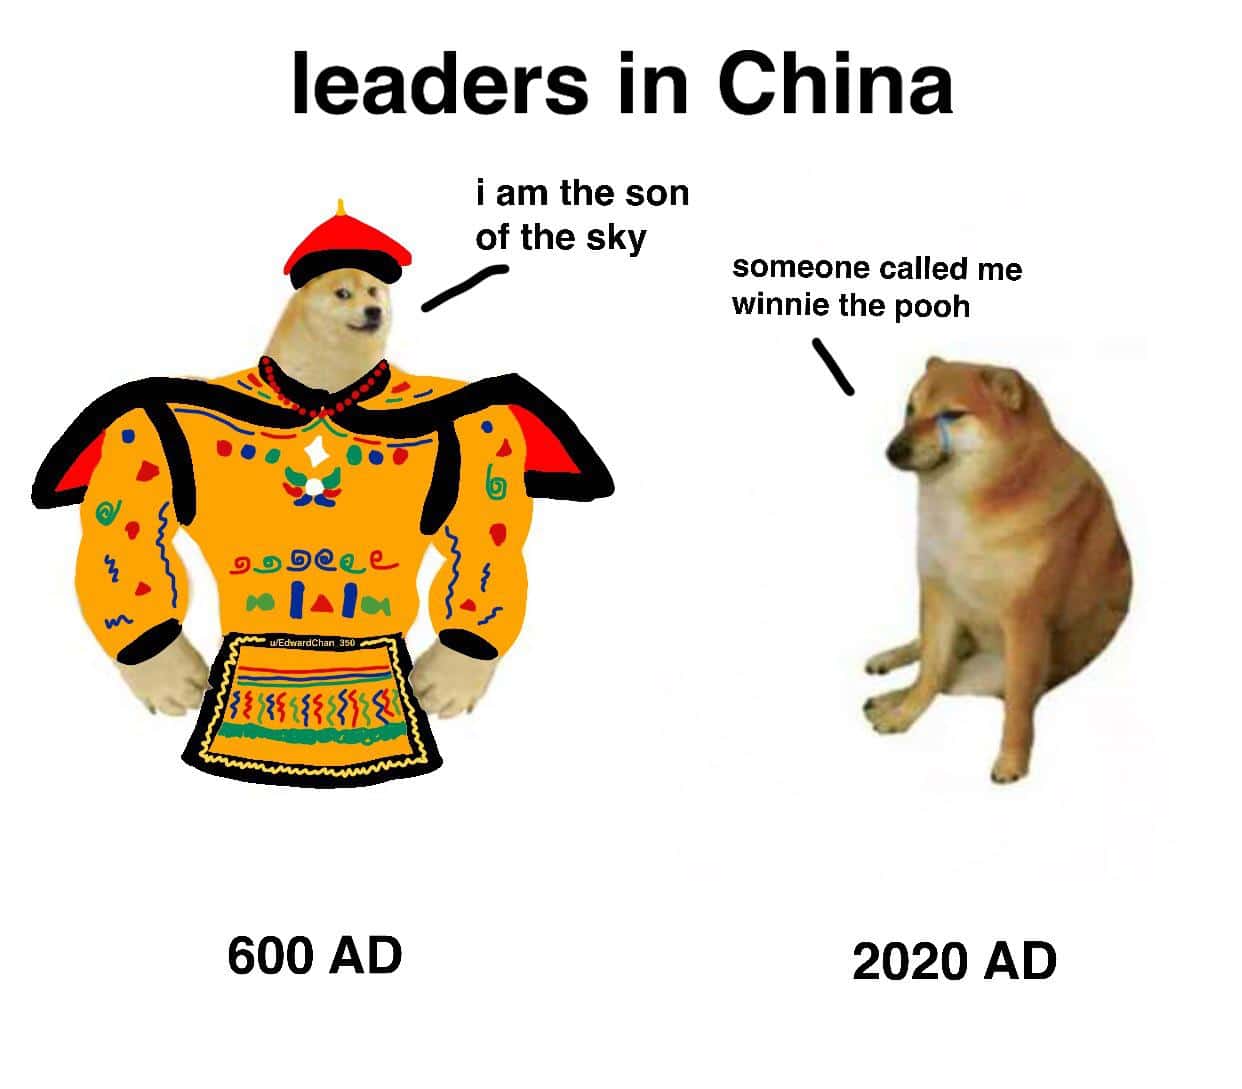 Dank, Heaven, Chinese, China, Mandate, Xi Dank Memes Dank, Heaven, Chinese, China, Mandate, Xi text: leaders in China i am the son of the sky 6 9-99@ce— 600 AD someone called me winnie the pooh 2020 AD 